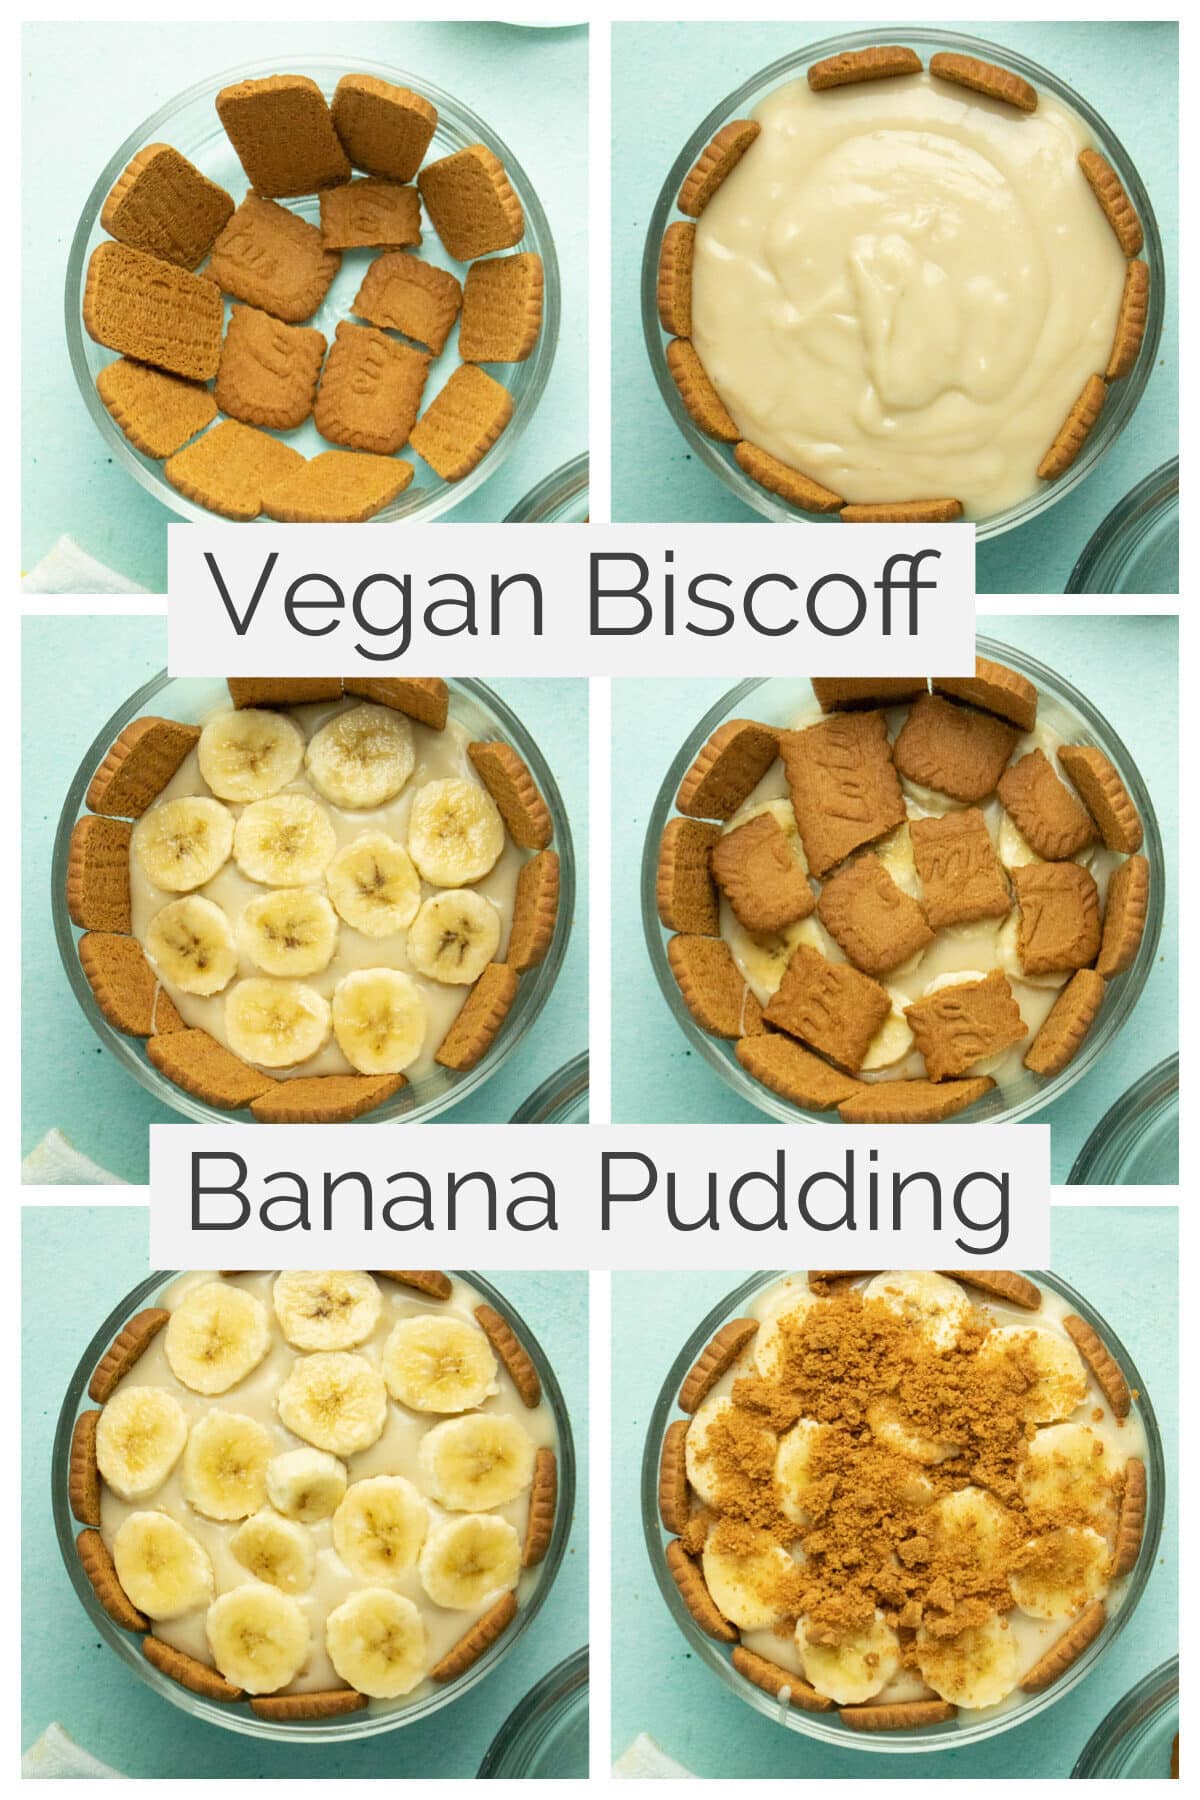 image collage showing: cookies lining the bowl, pudding layered on, banana slices layered on top, cookies layered on top, more bananas, and crumbled Biscoff cookies topping off the pudding, text overlay